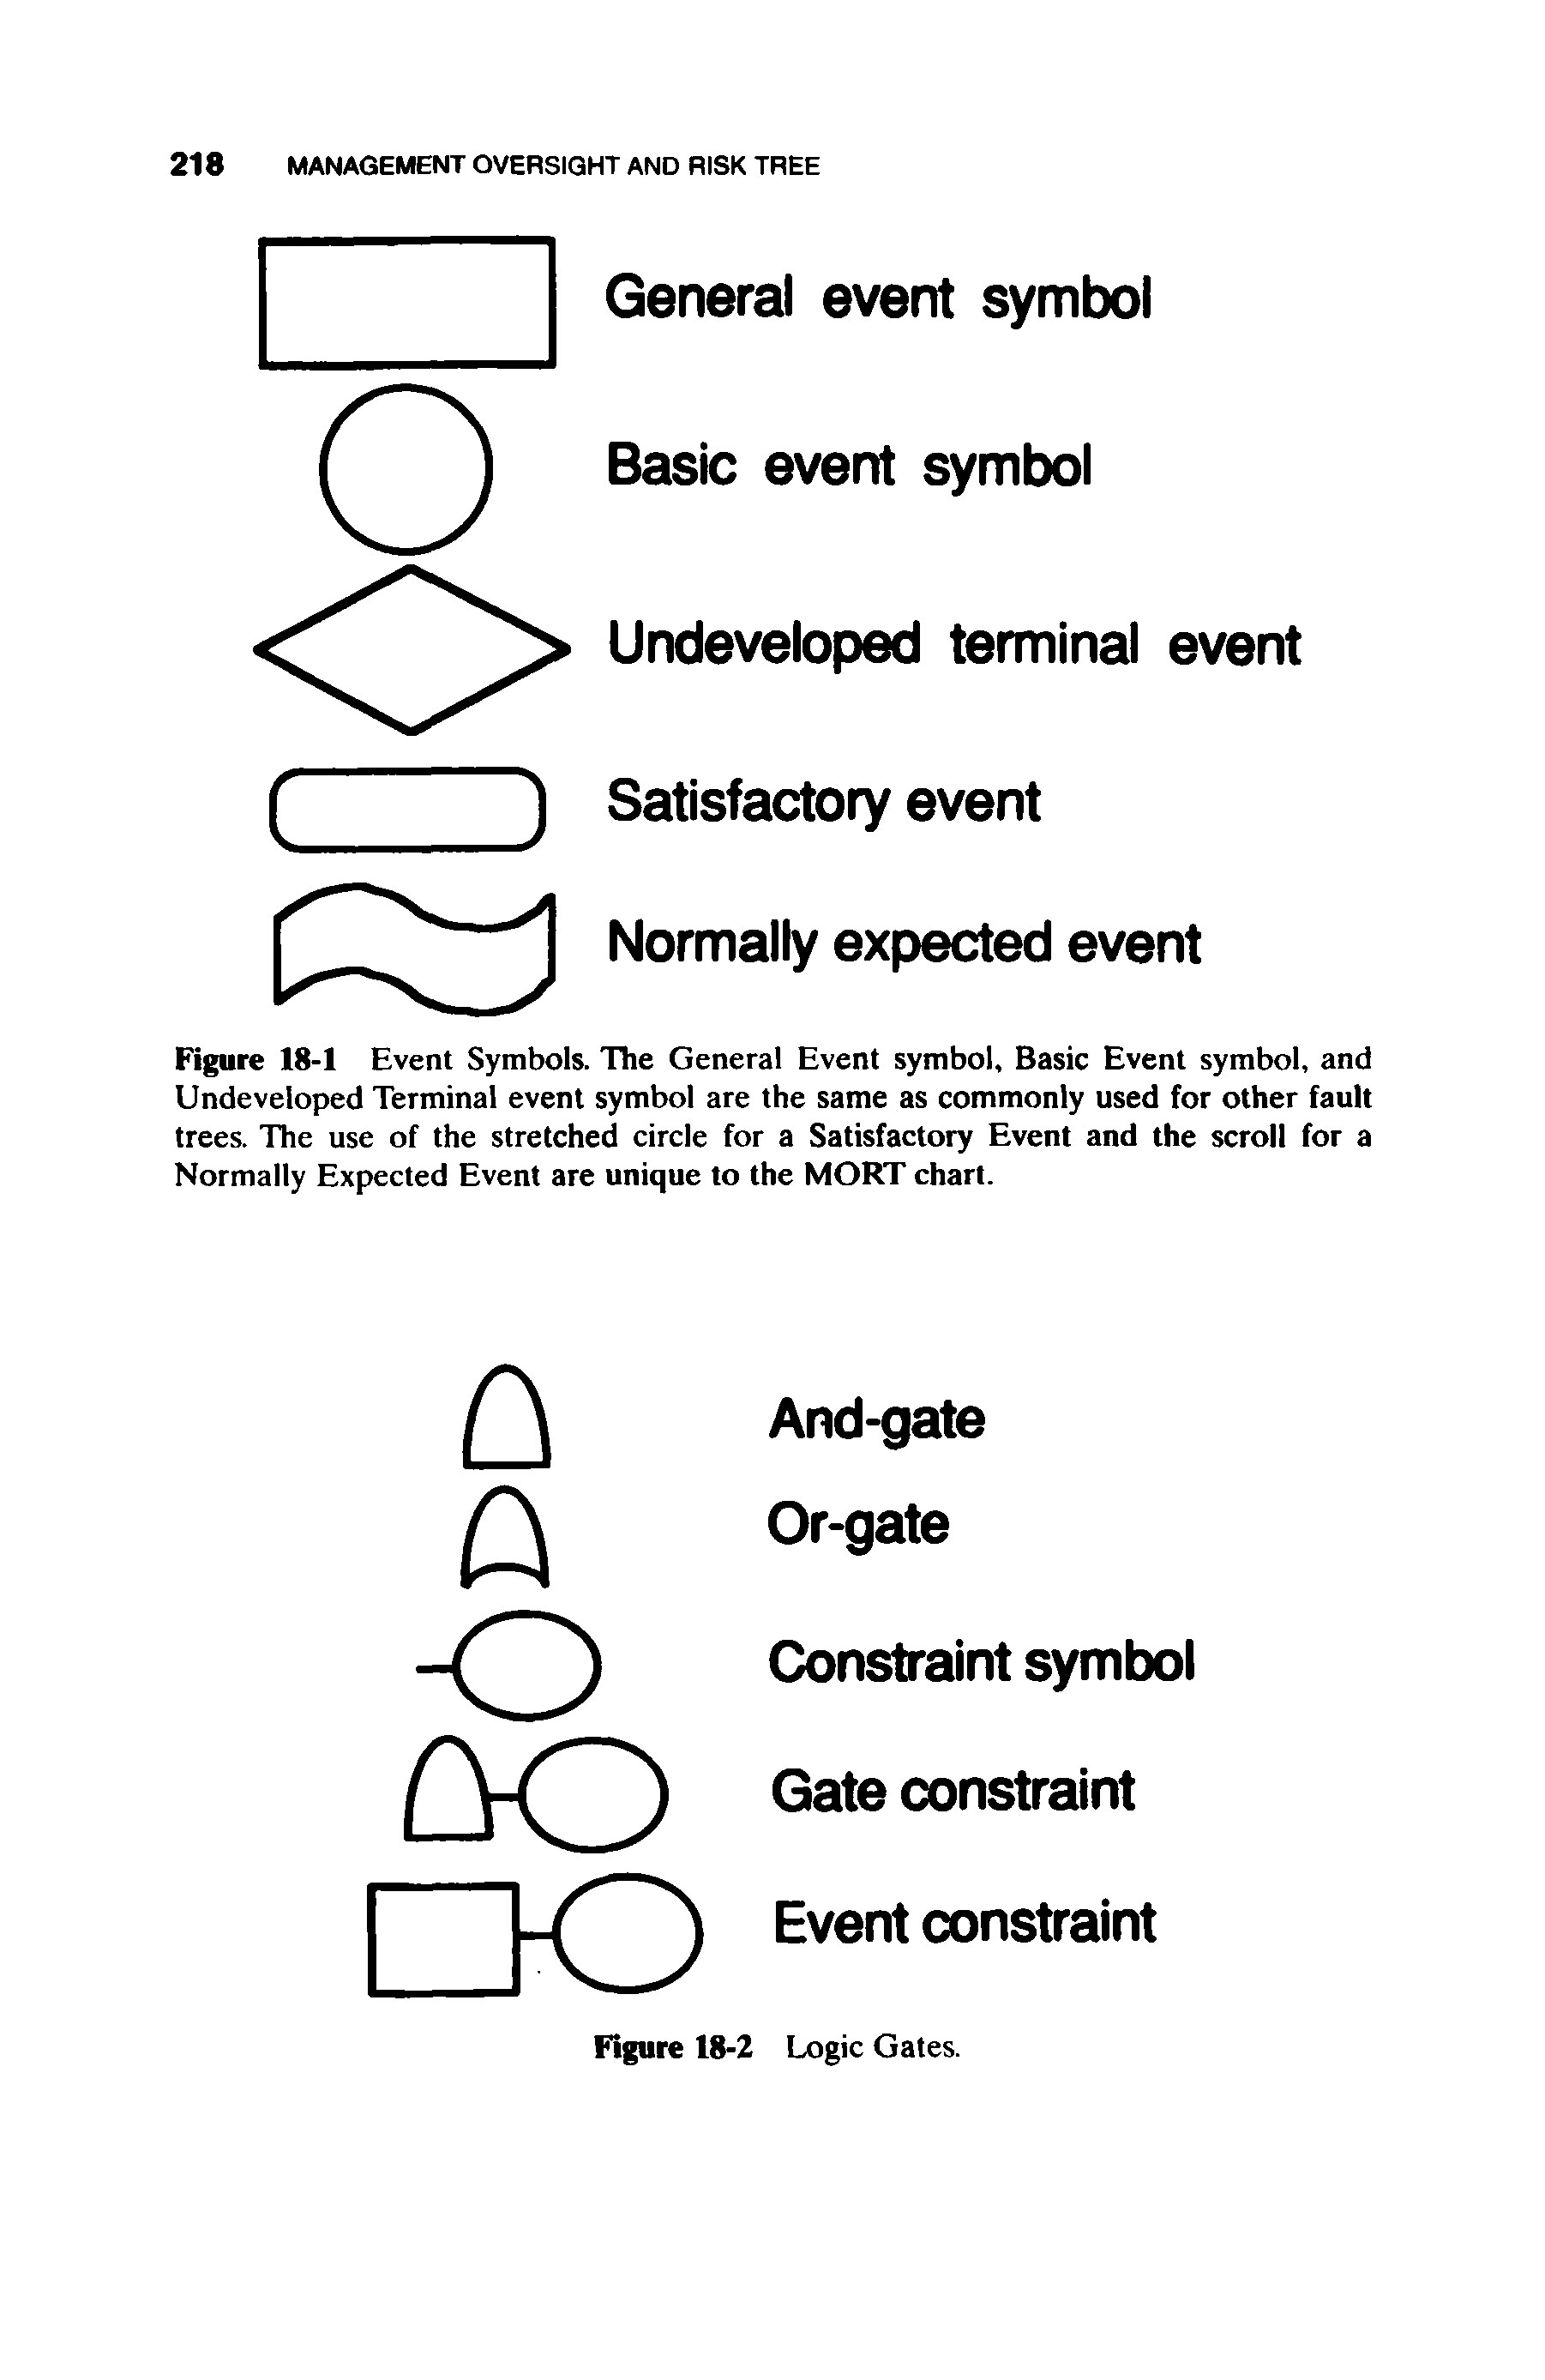 Figure 18-1 Event Symbols. The General Event symbol, Basic Event symbol, and Undeveloped Terminal event symbol are the same as commonly used for other fault trees. The use of the stretched circle for a Satisfactory Event and the scroll for a Normally Expected Event are unique to the MORT chart.